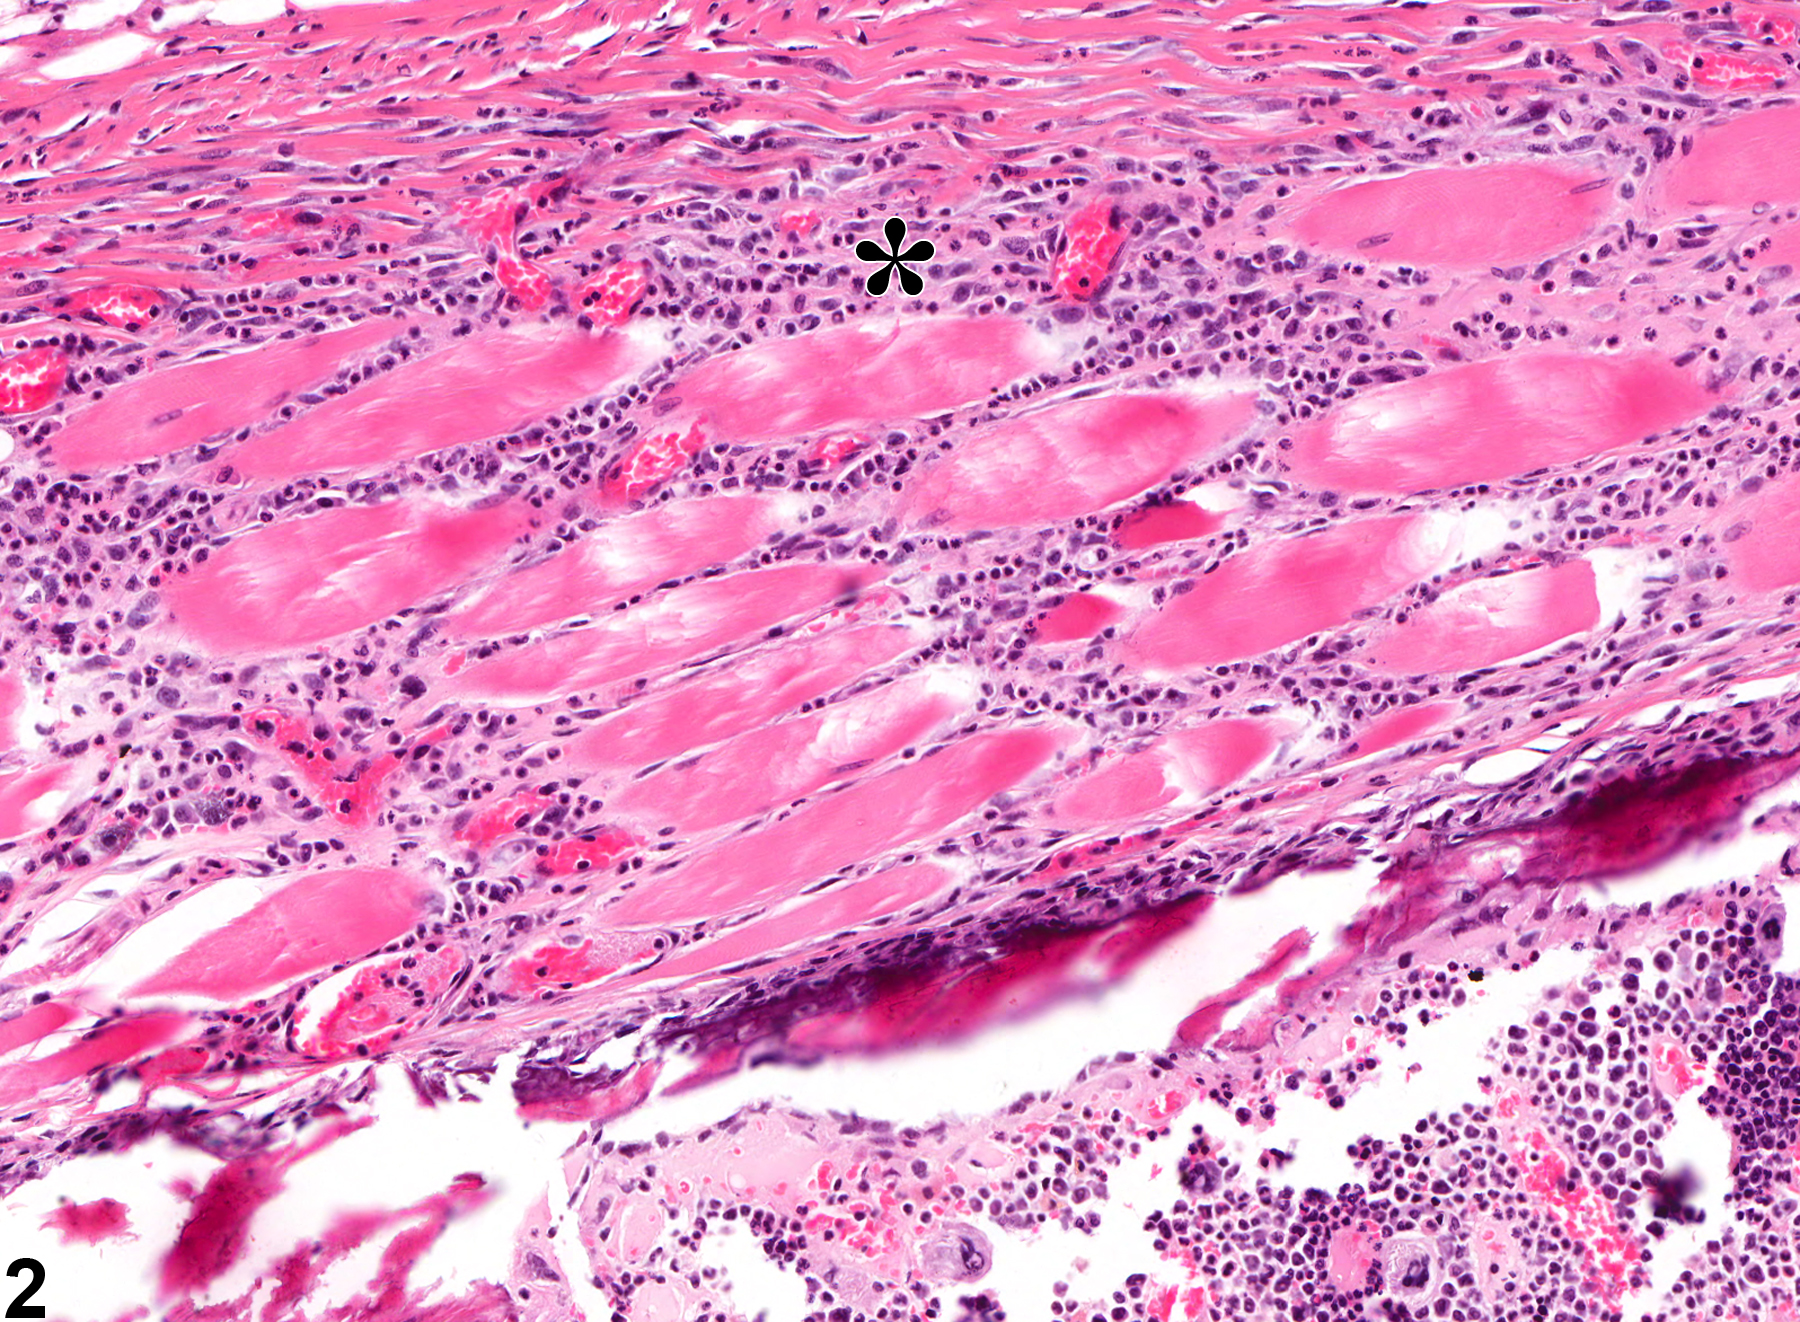 Image of inflammation in the penis from a male B6C3F1 mouse in a chronic study